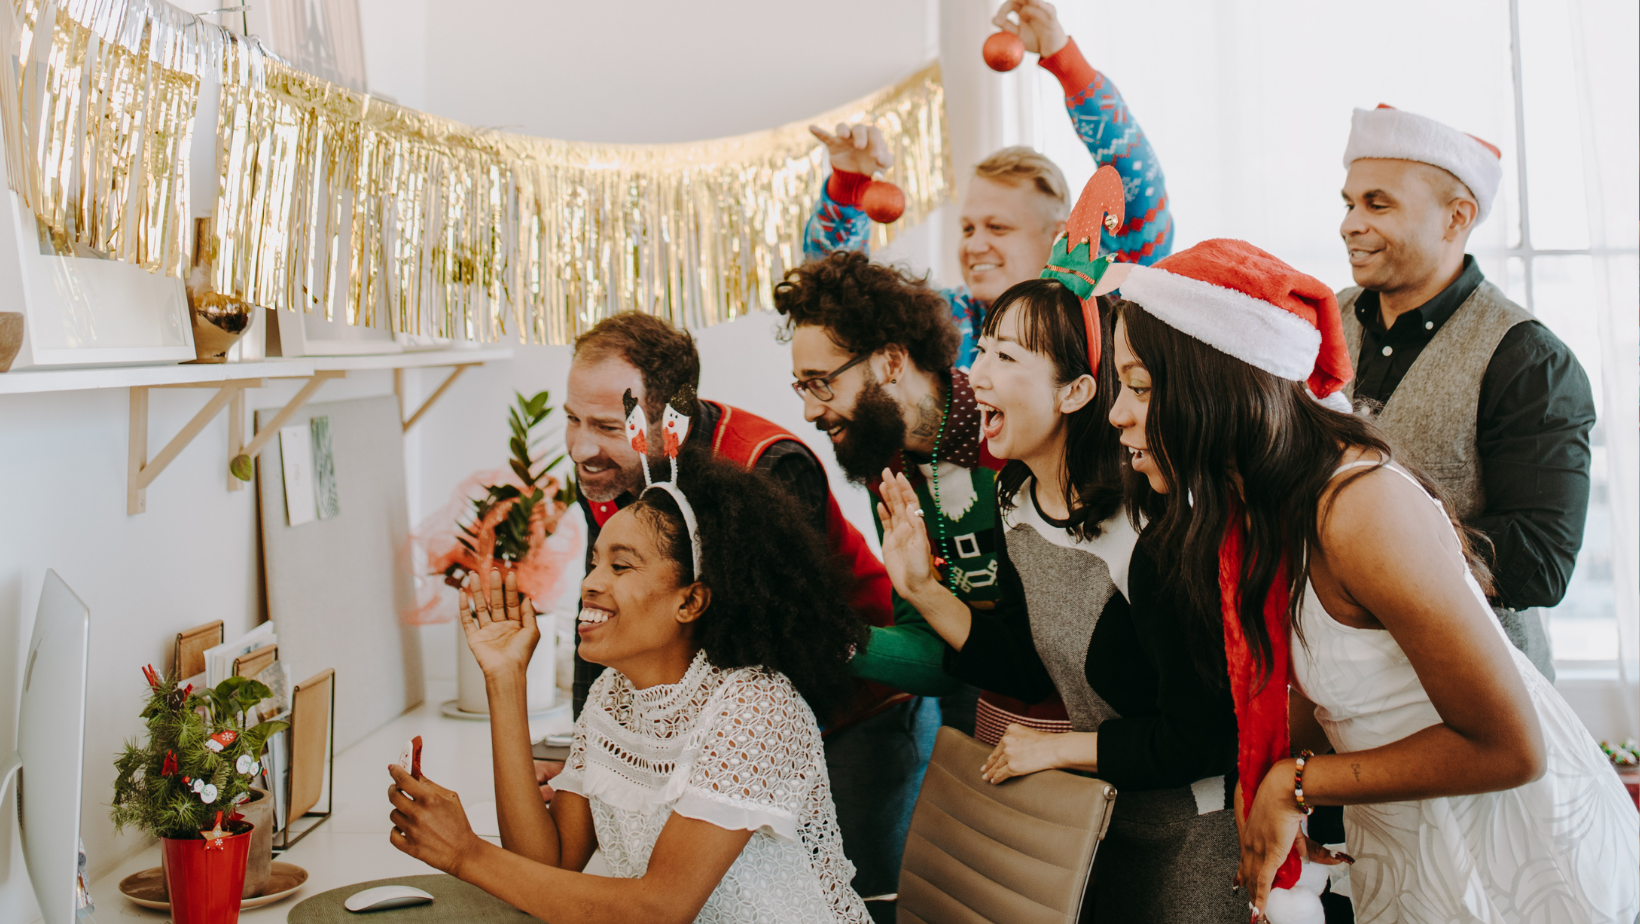 inclusive office holiday parties make employees feel valued